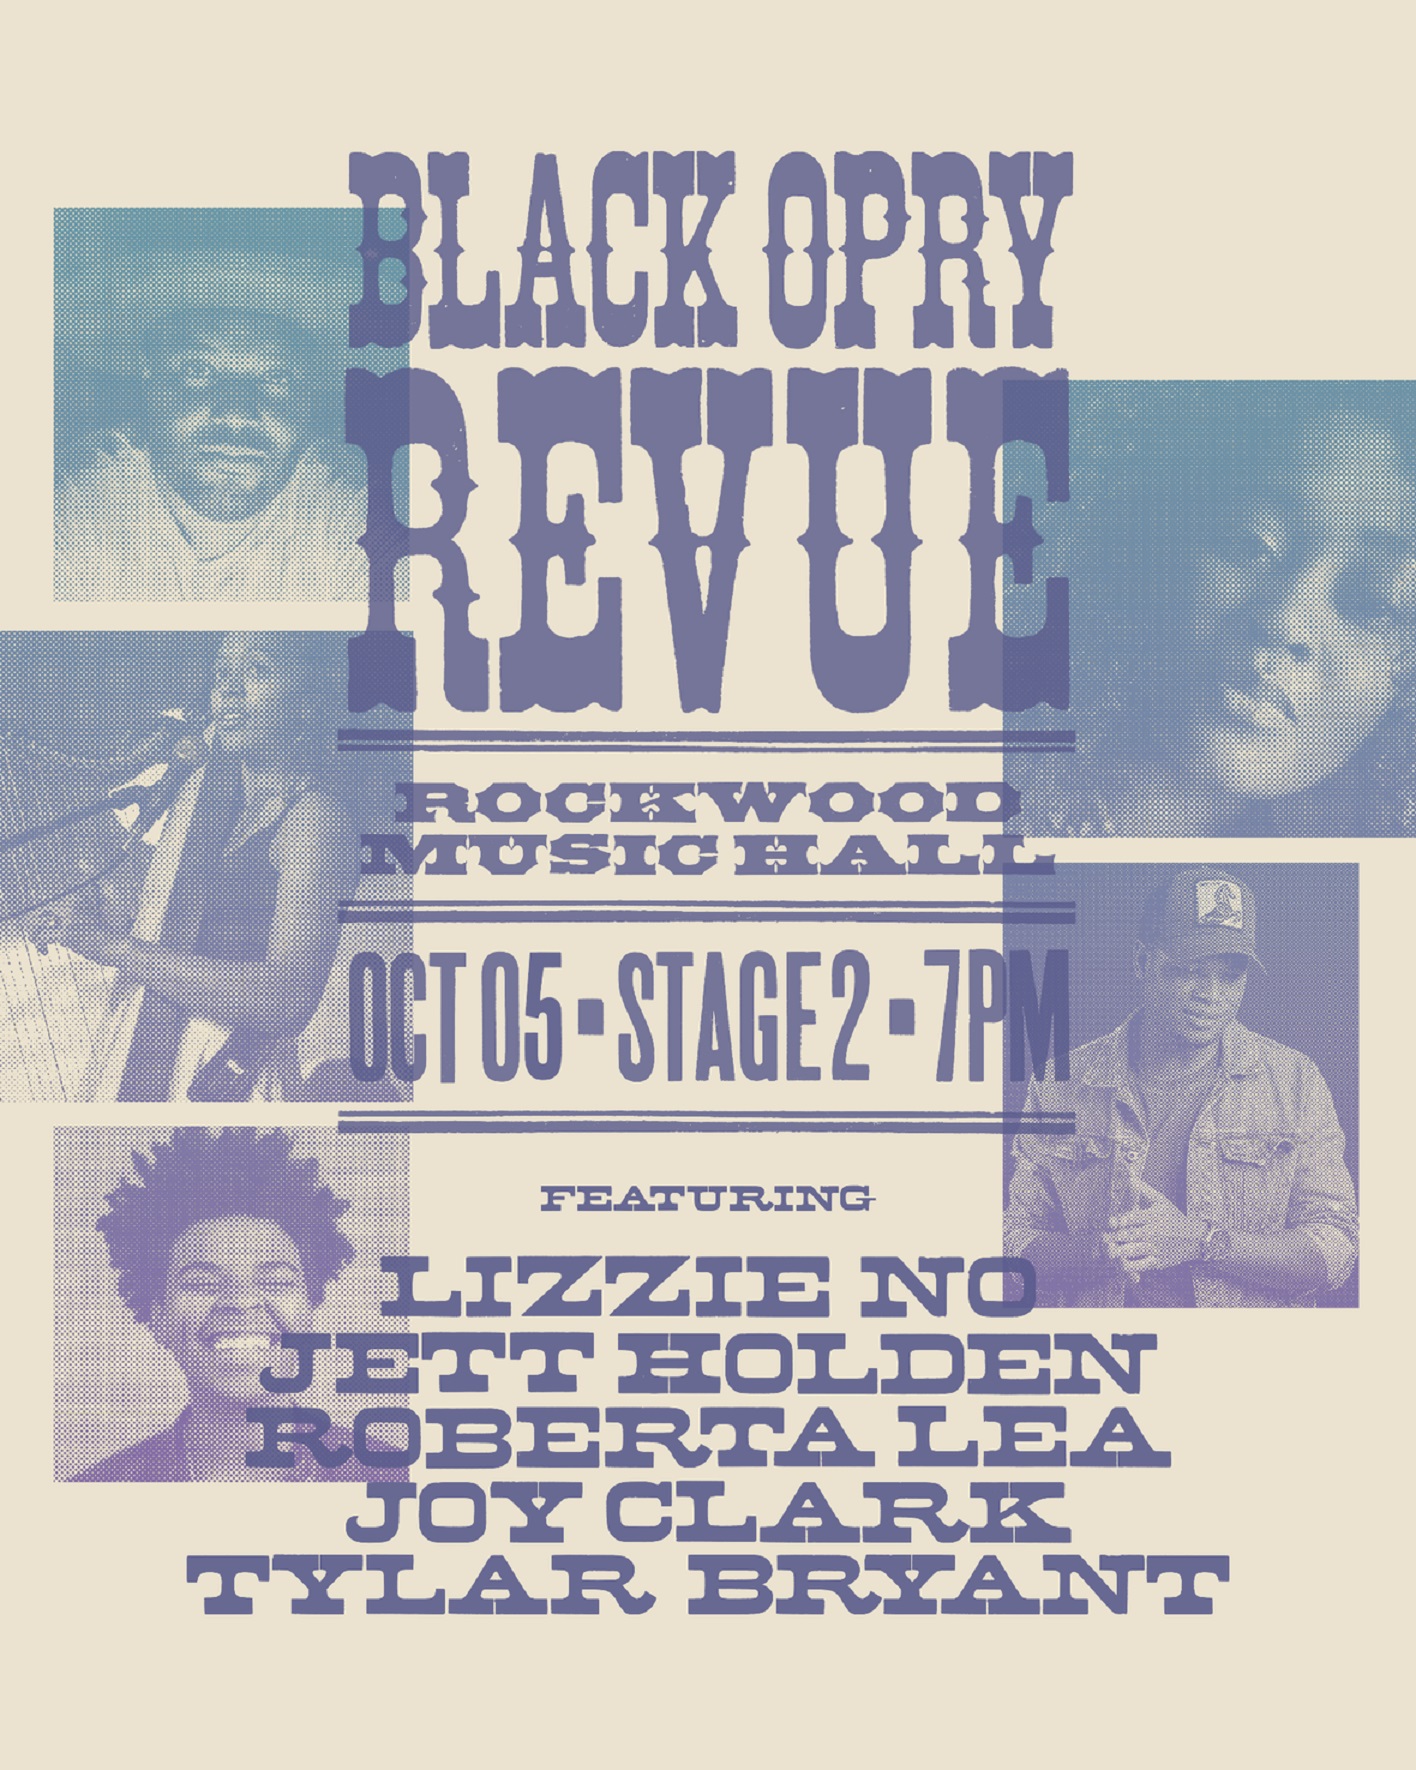 First-Ever Black Opry Revue at Rockwood Music Hall on October 5 